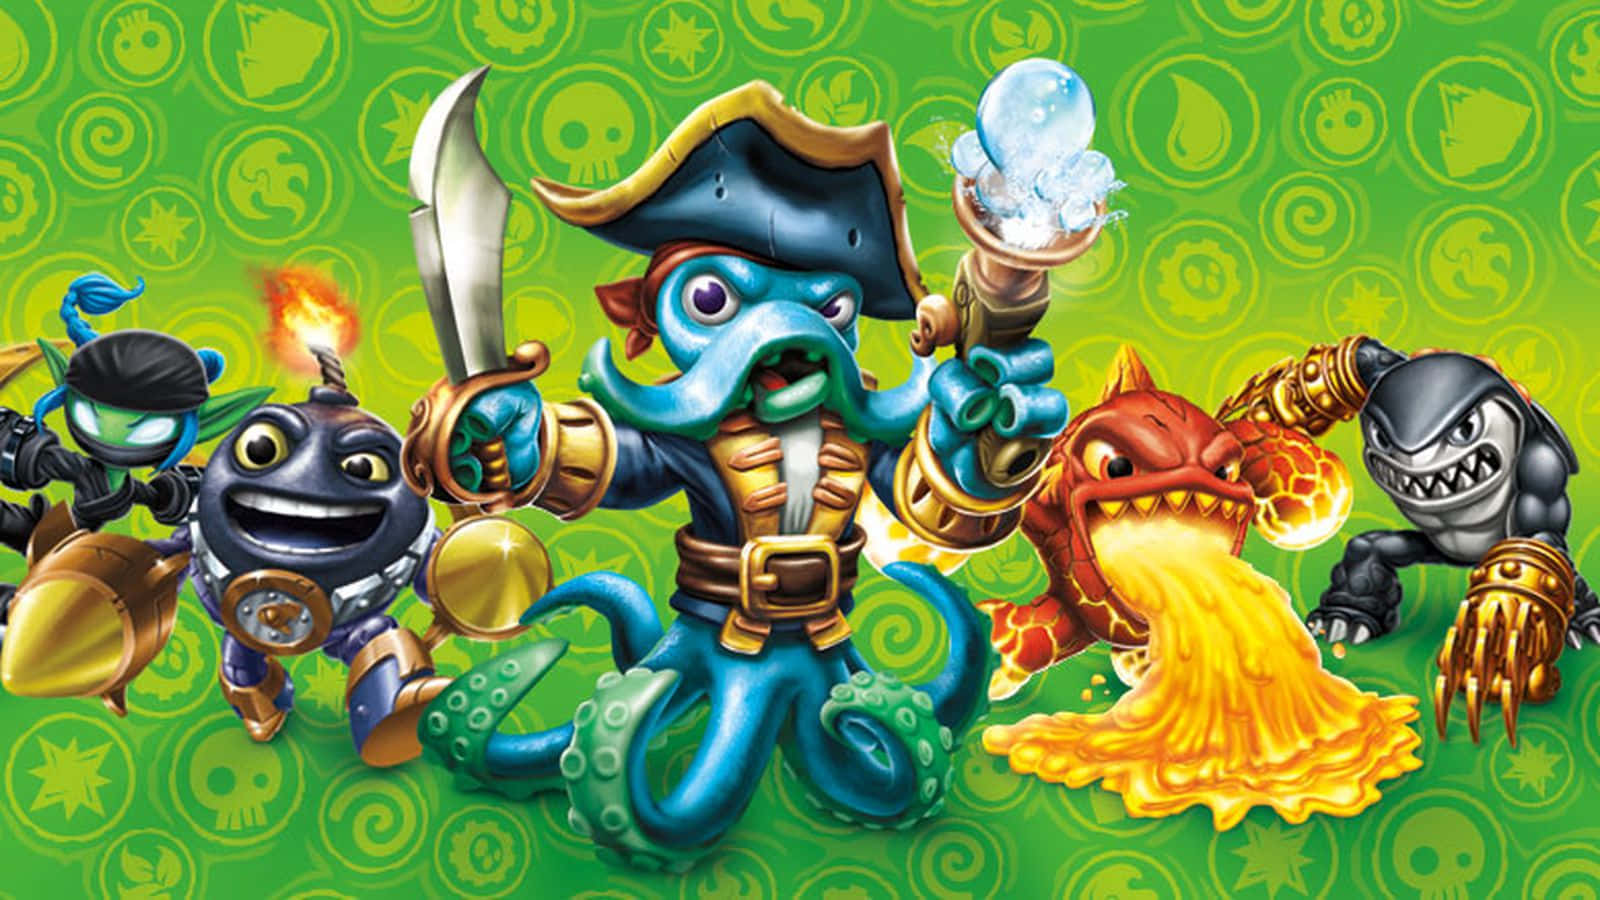 Explore a world of magic and adventure with Skylanders. Wallpaper